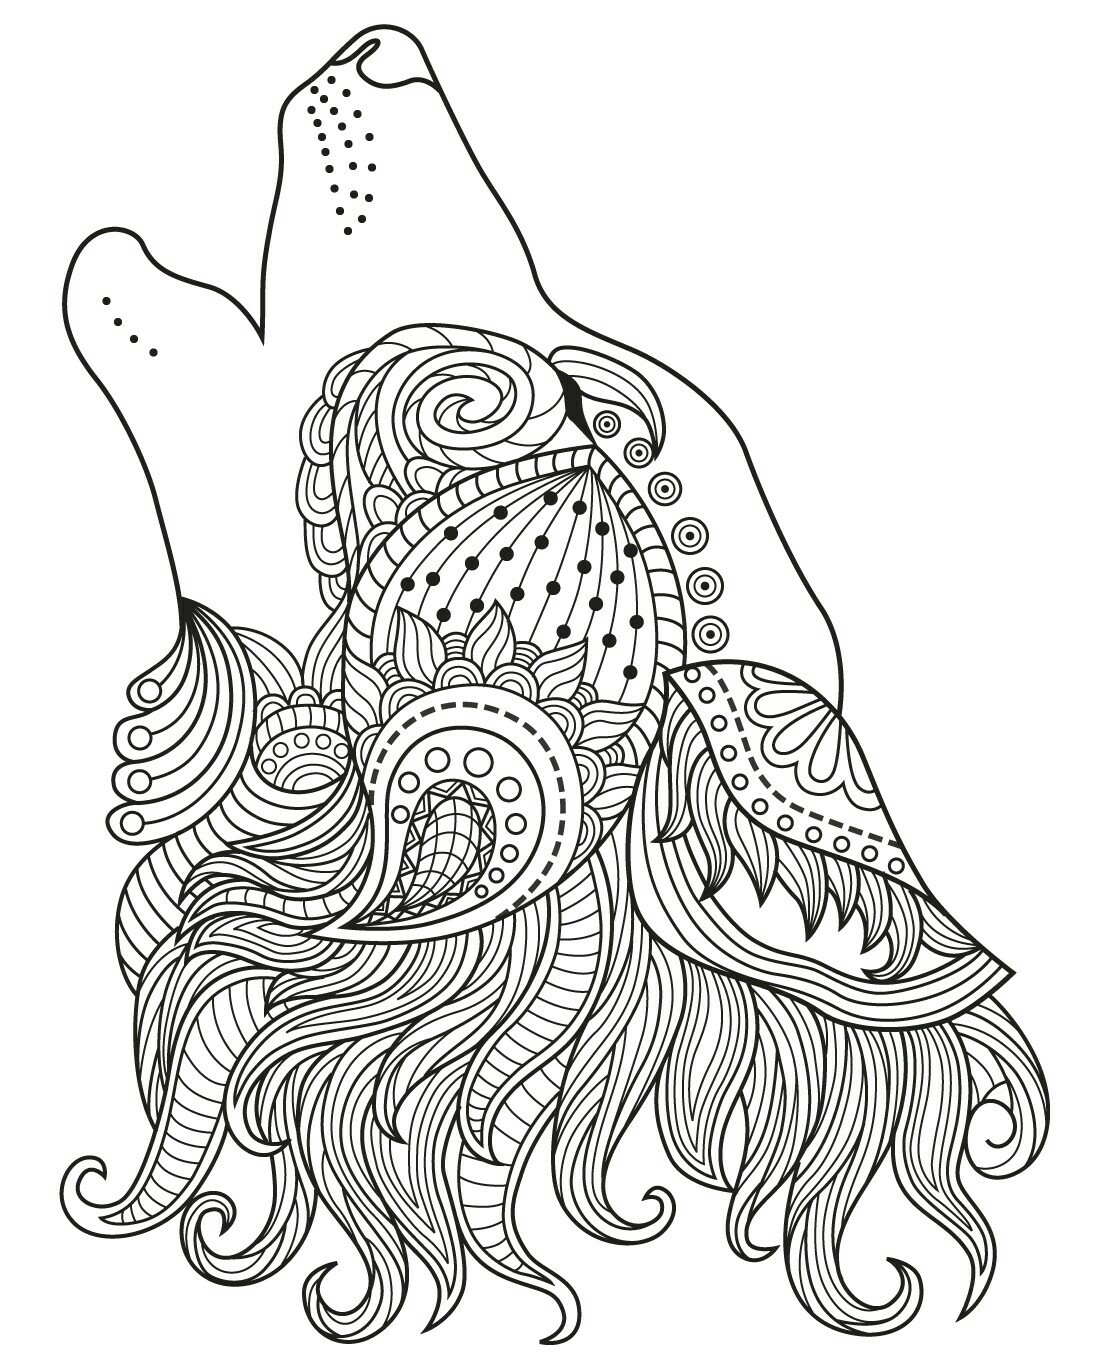 Wolf Coloring Pages for Adults   Best Coloring Pages For Kids